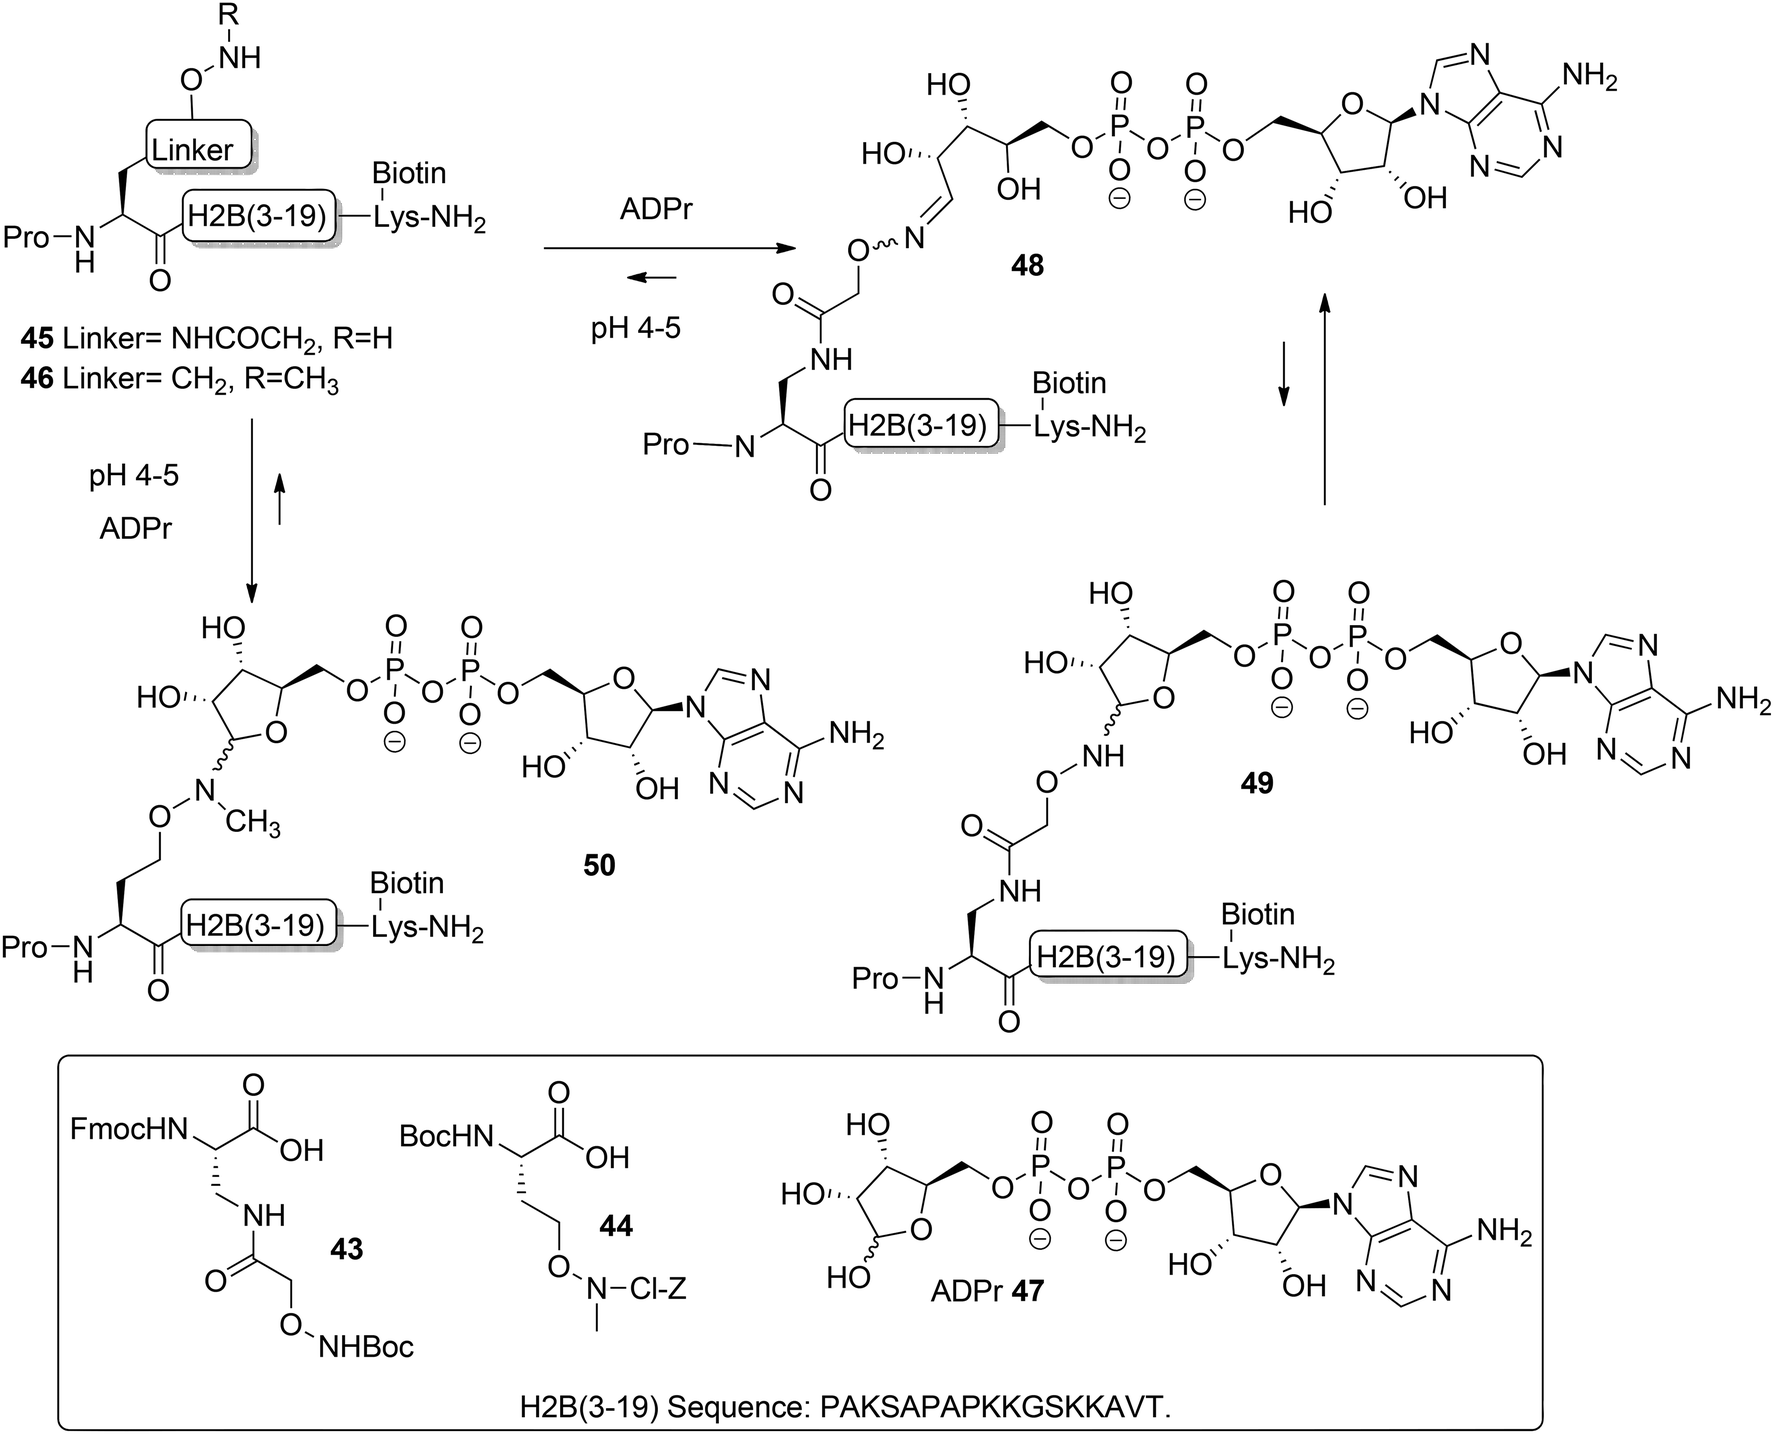 Medicinal Chemistry Perspective on Targeting Mono-ADP-Ribosylating PARPs  with Small Molecules